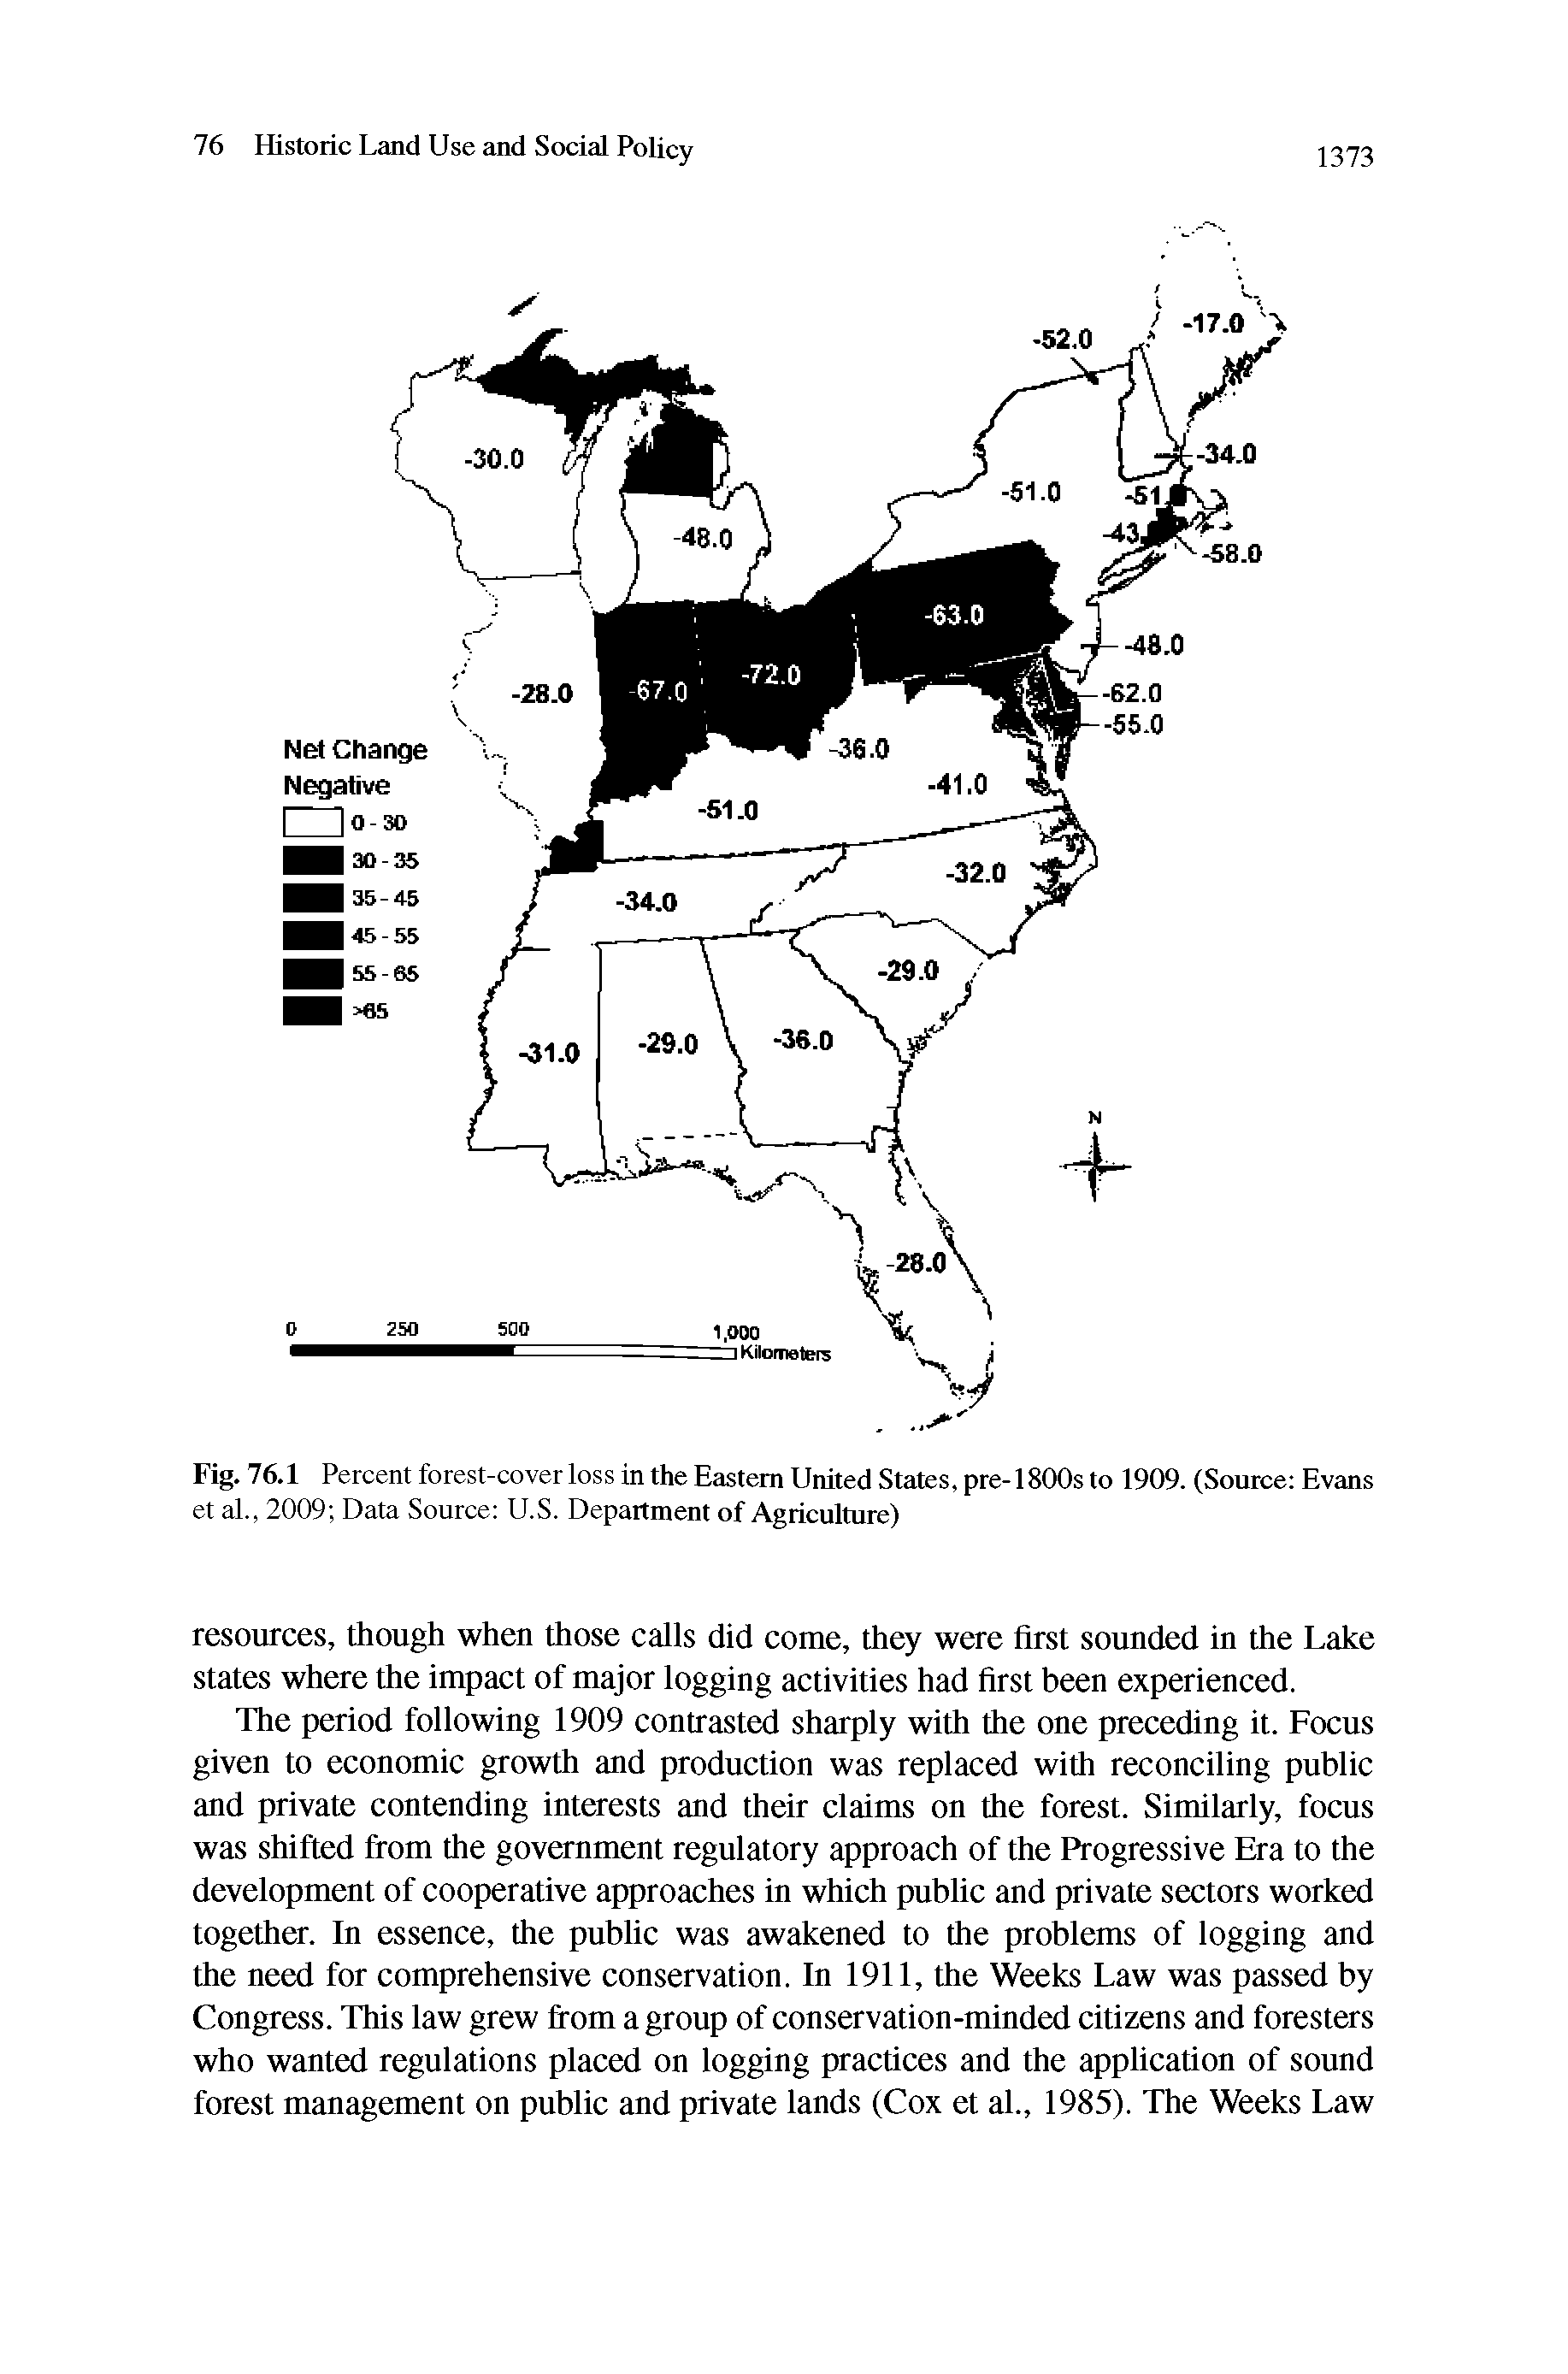 Fig. 76.1 Percent forest-cover loss in the Eastern United States, pre-1800s to 1909. (Source Evans et al., 2009 Data Source U.S. Department of Agriculture)...